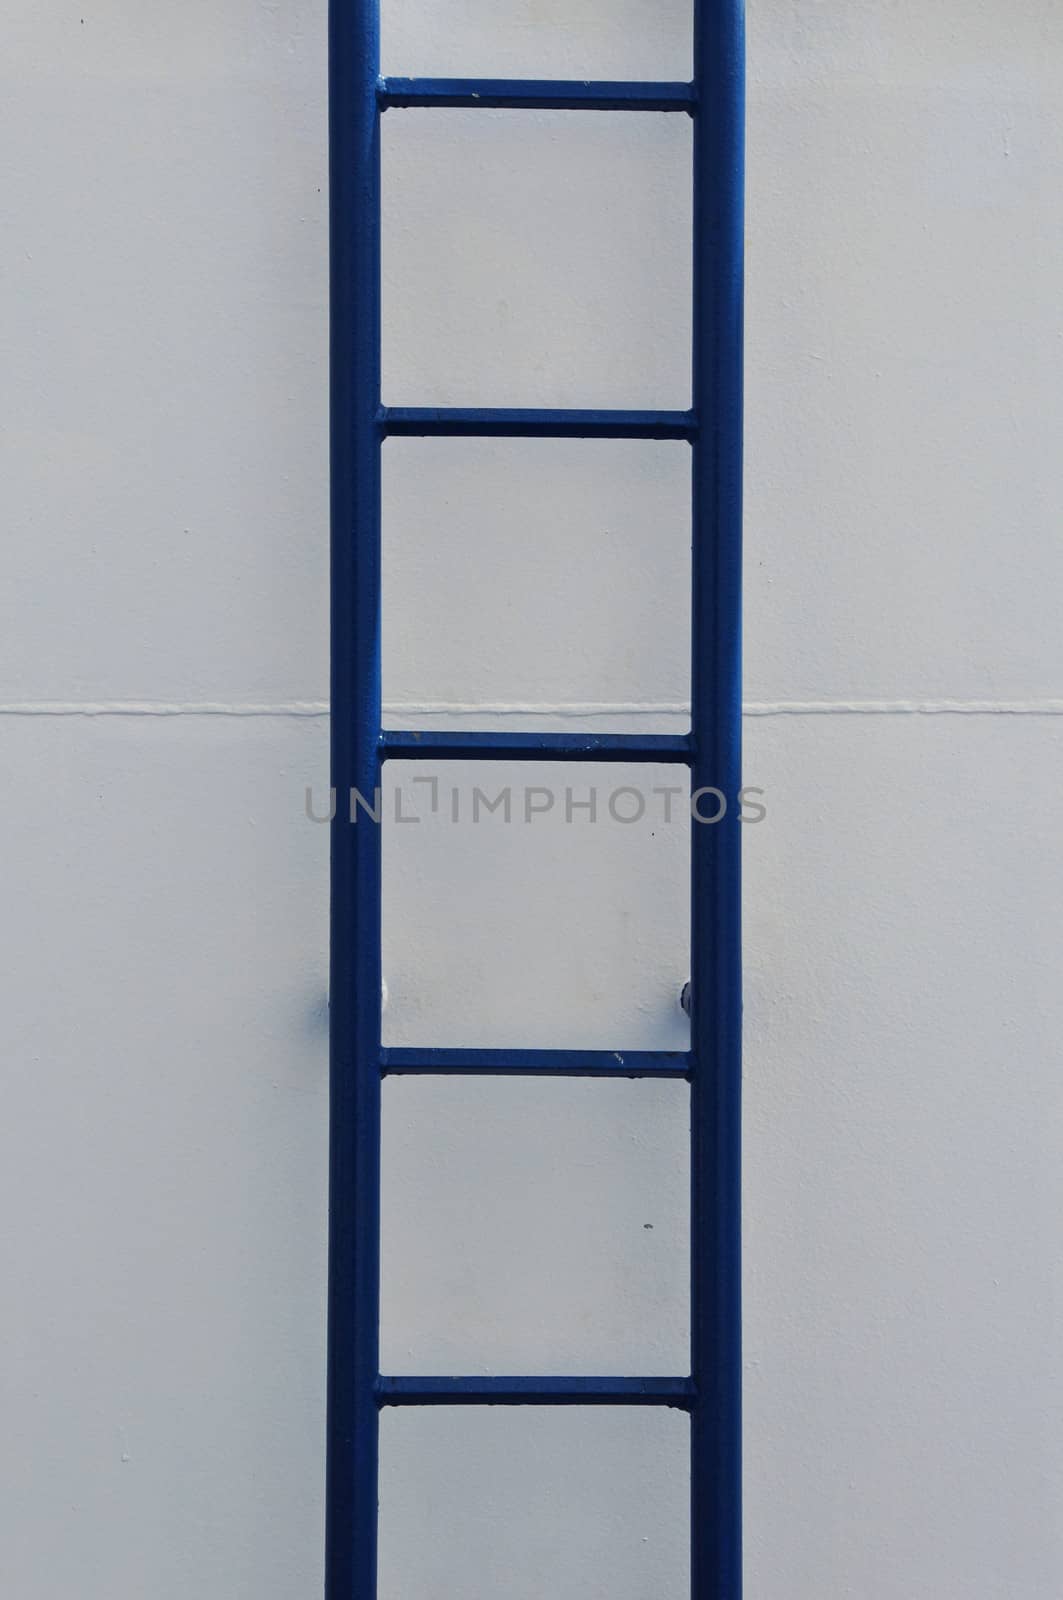 Iron ladder and ship wall abstract background texture.